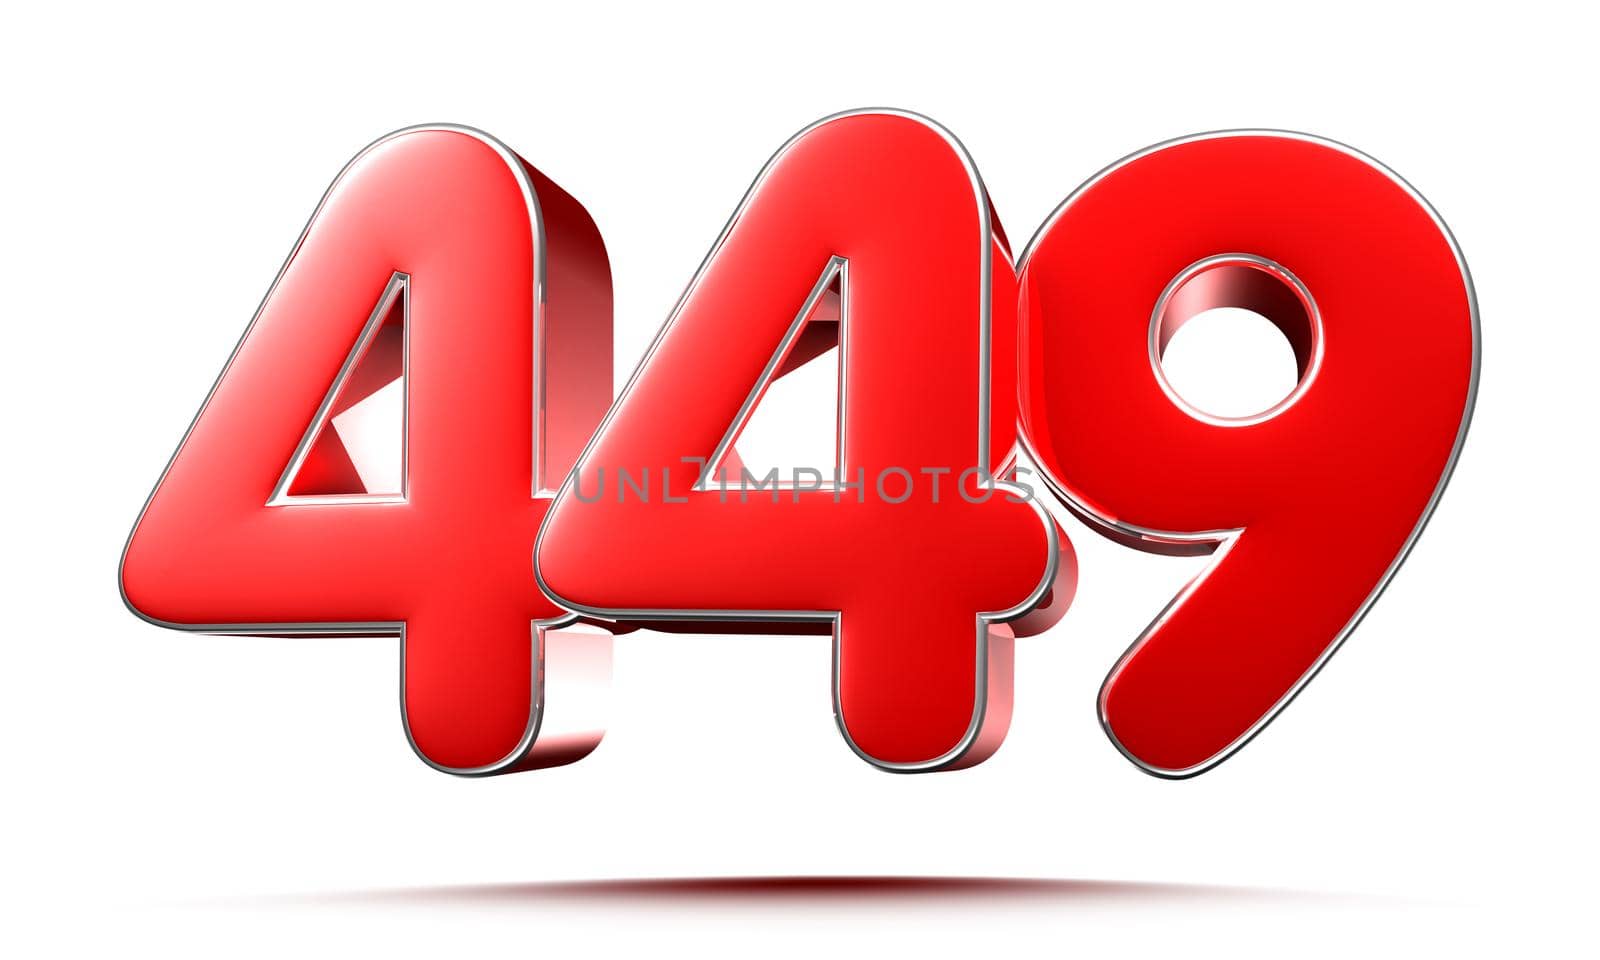 Rounded red numbers 449 on white background 3D illustration with clipping path